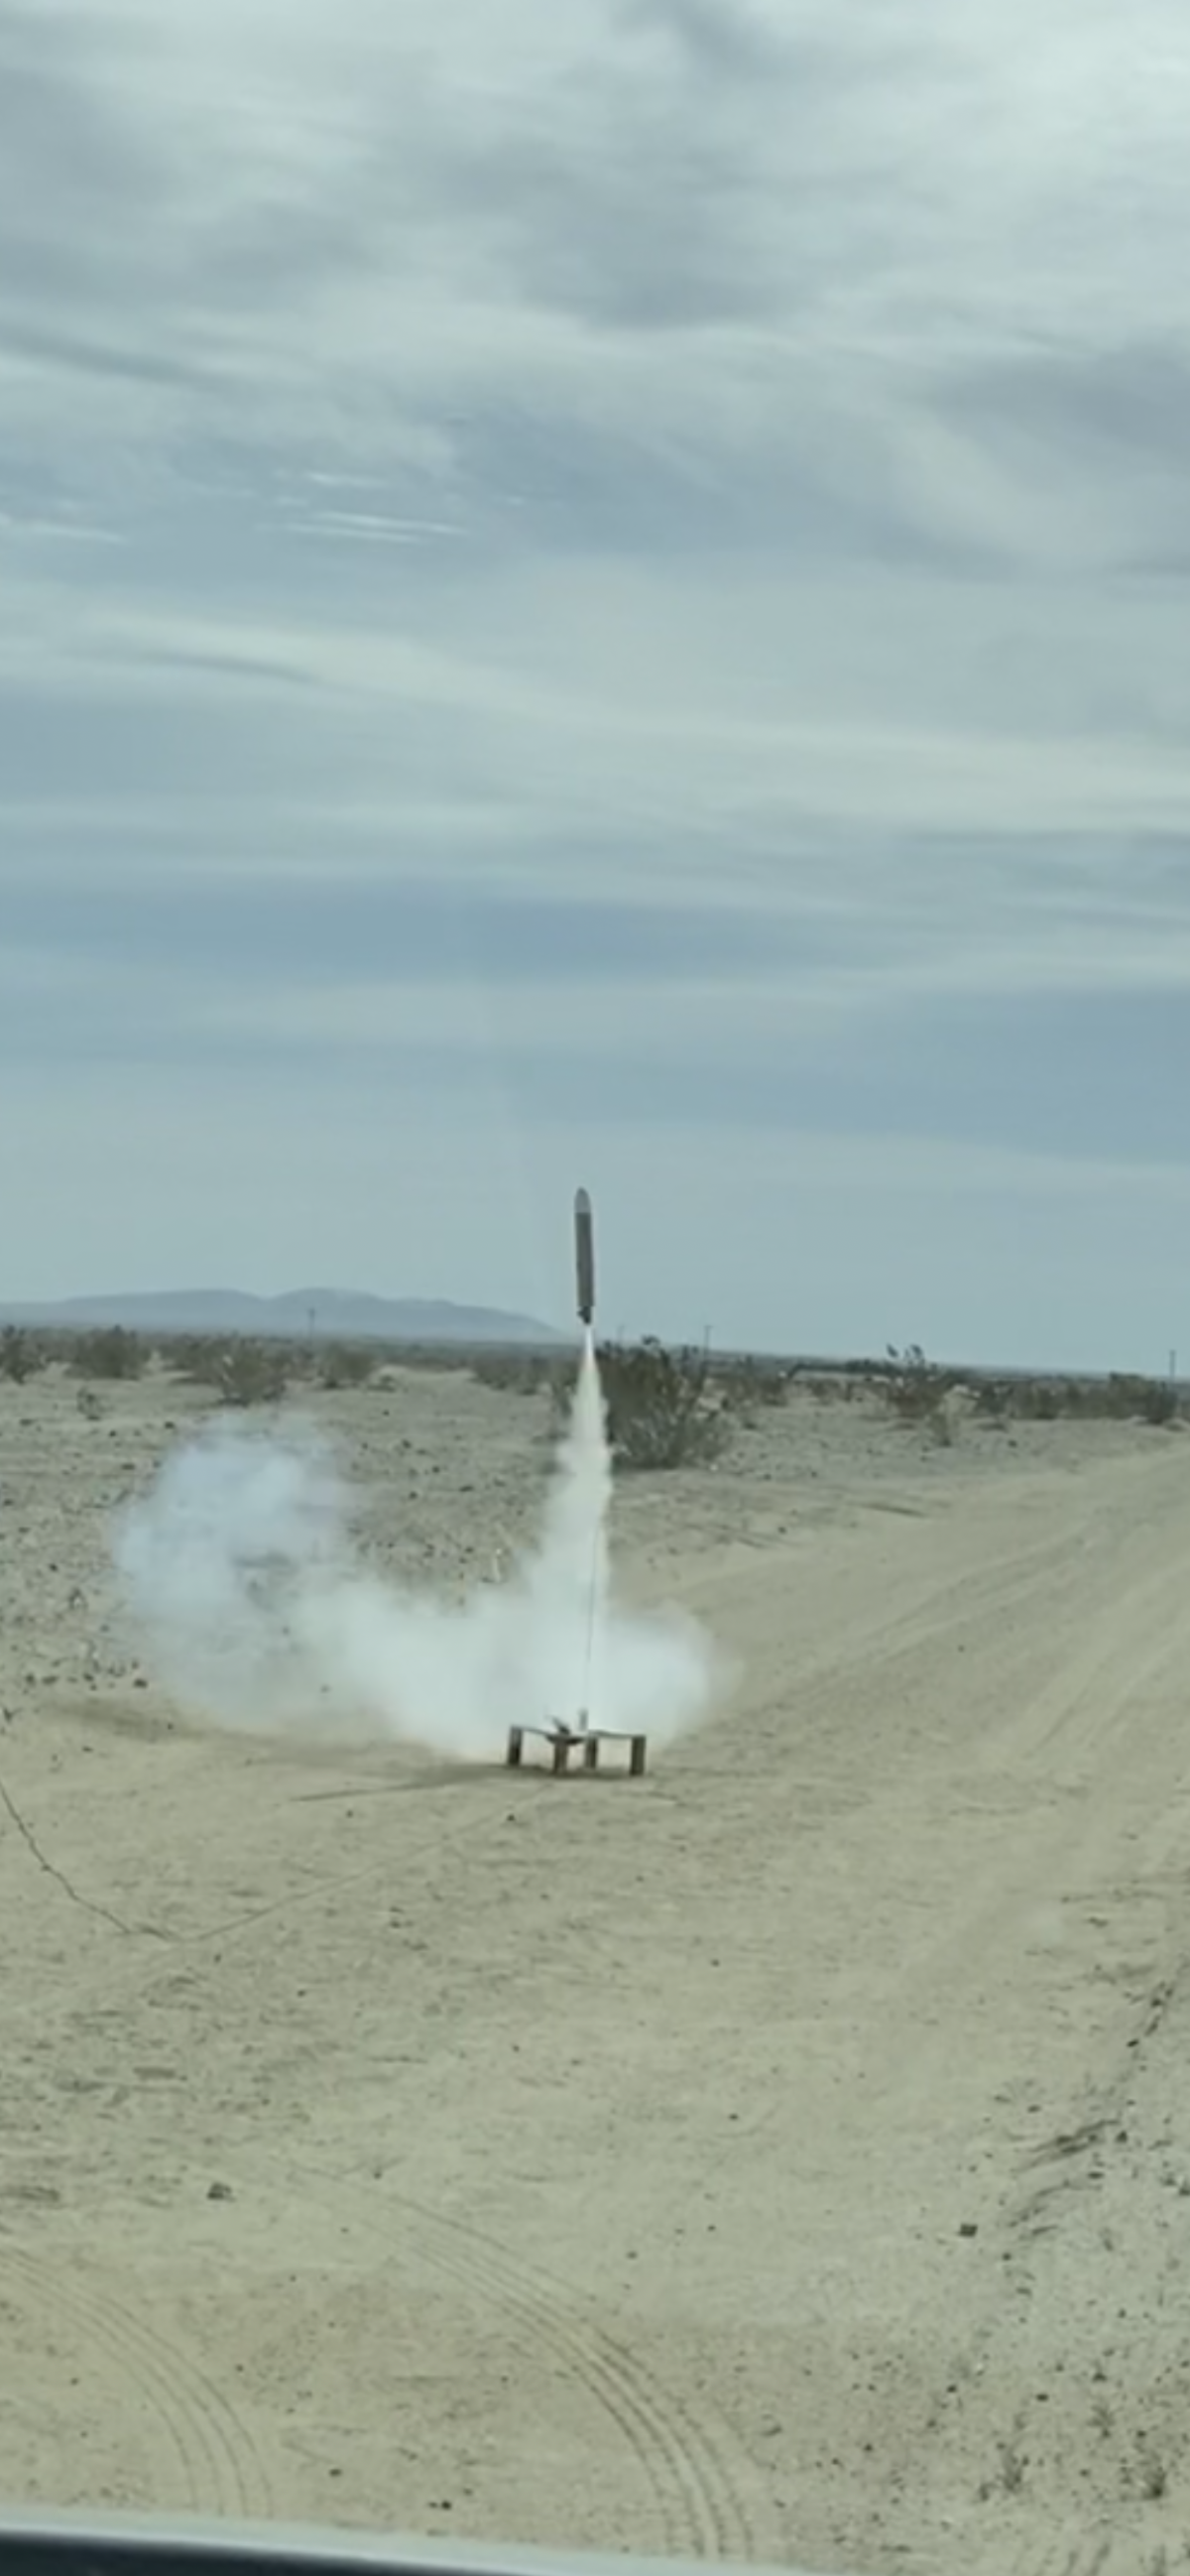 The Aerofusion team successfully launches its thrust-vector-controlled rocket 